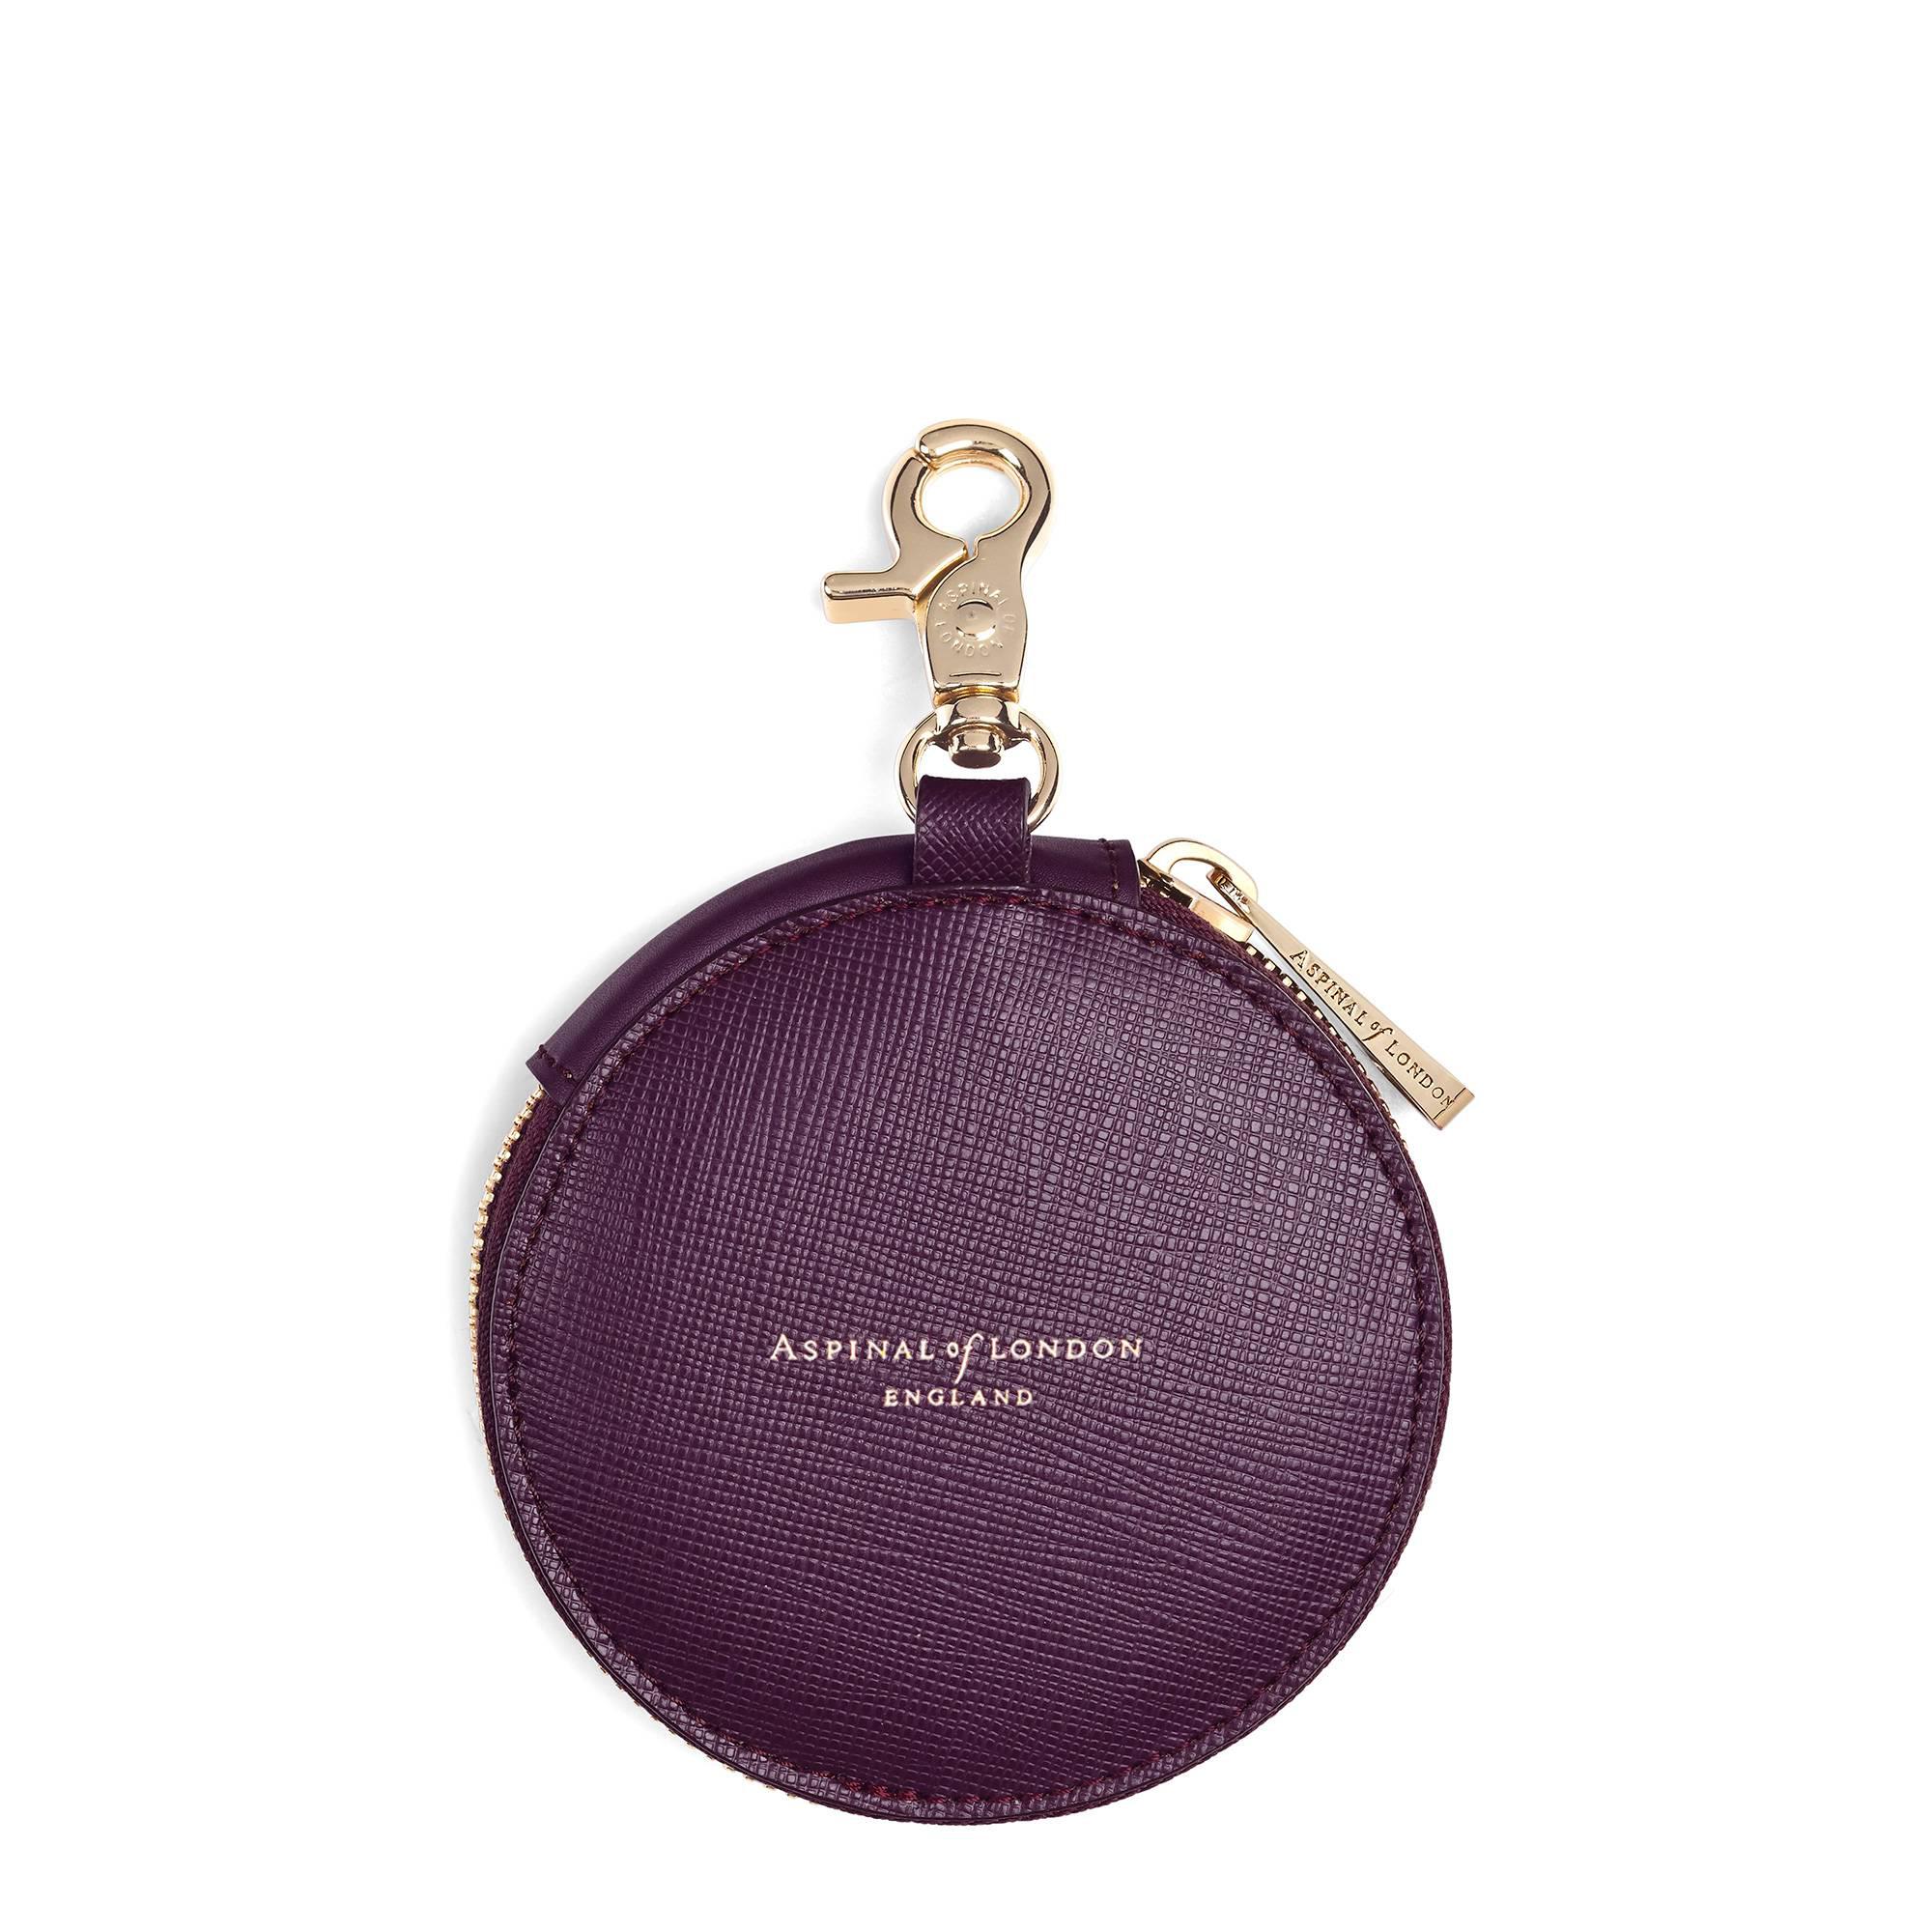 Lyst - Aspinal Round Coin Purse With Keyring in Purple